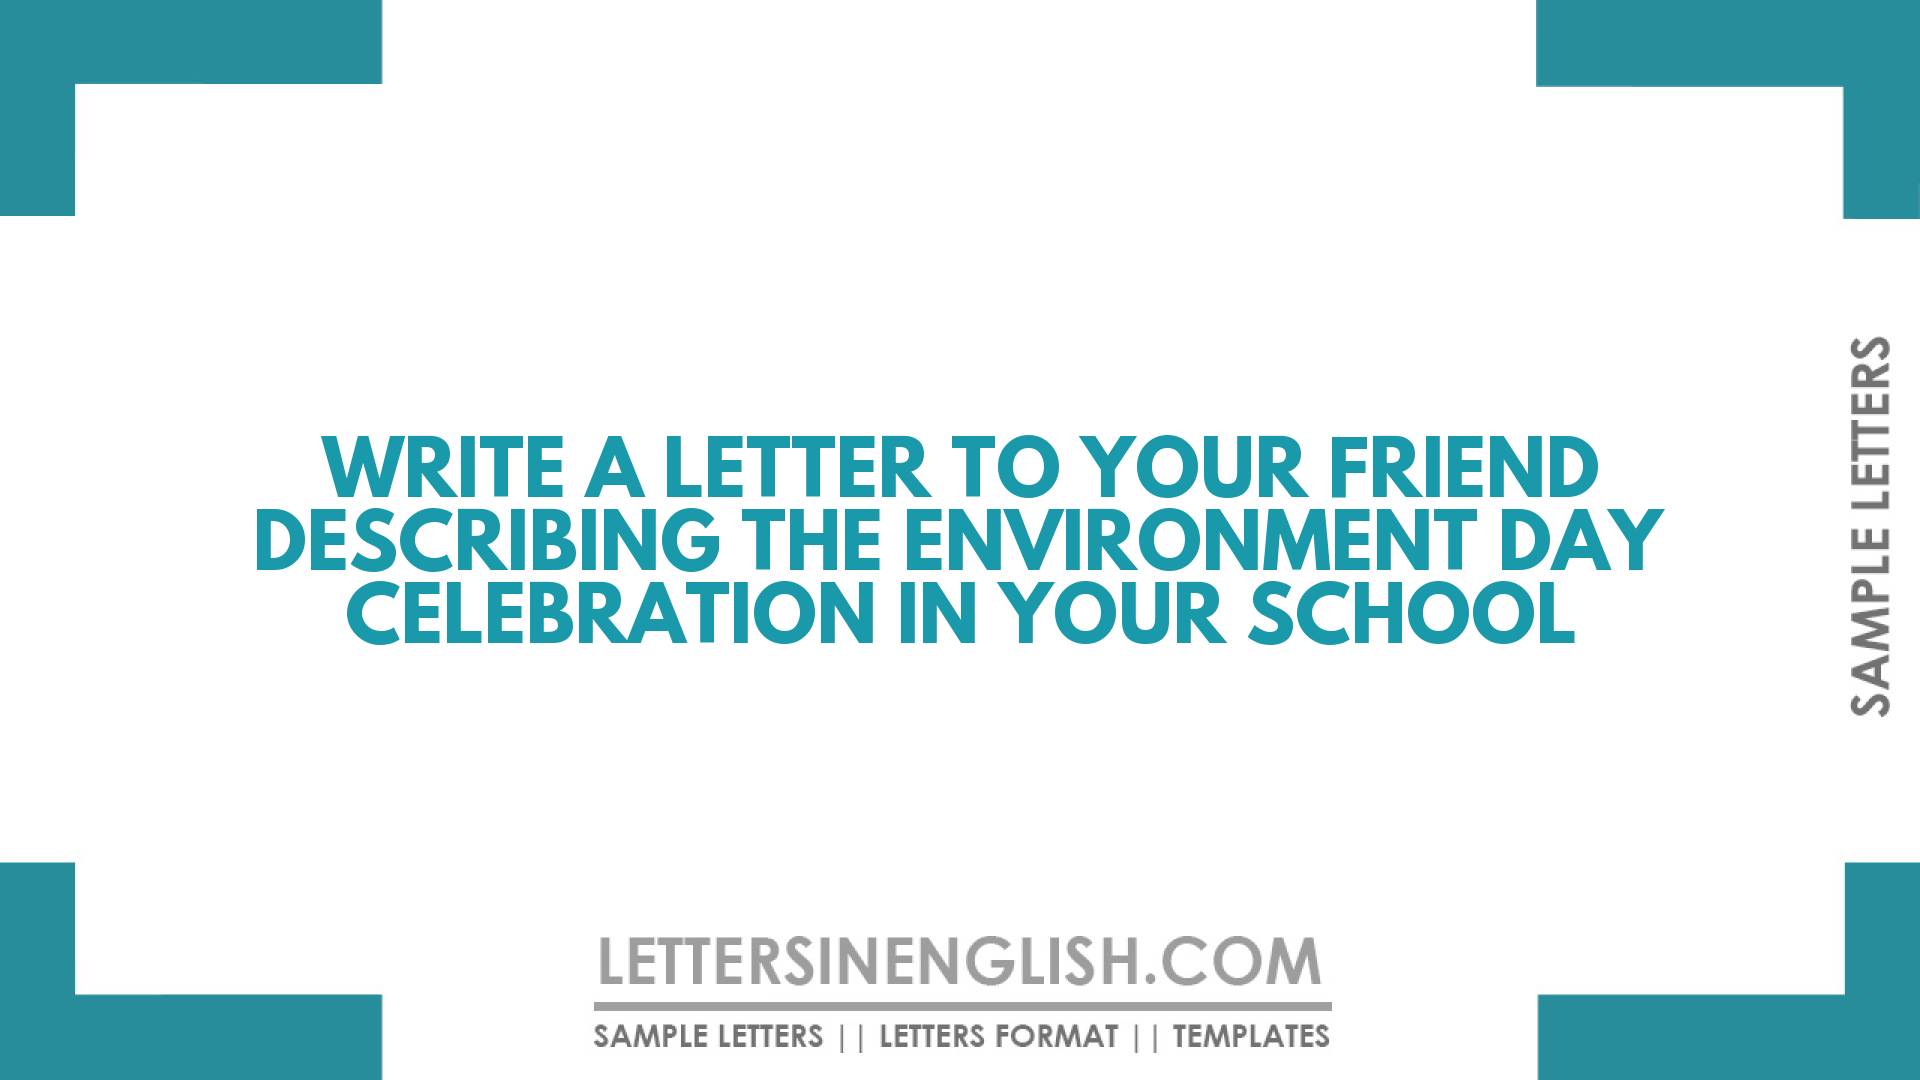 Write a Letter to Your Friend Describing the Environment Day Celebration in Your School